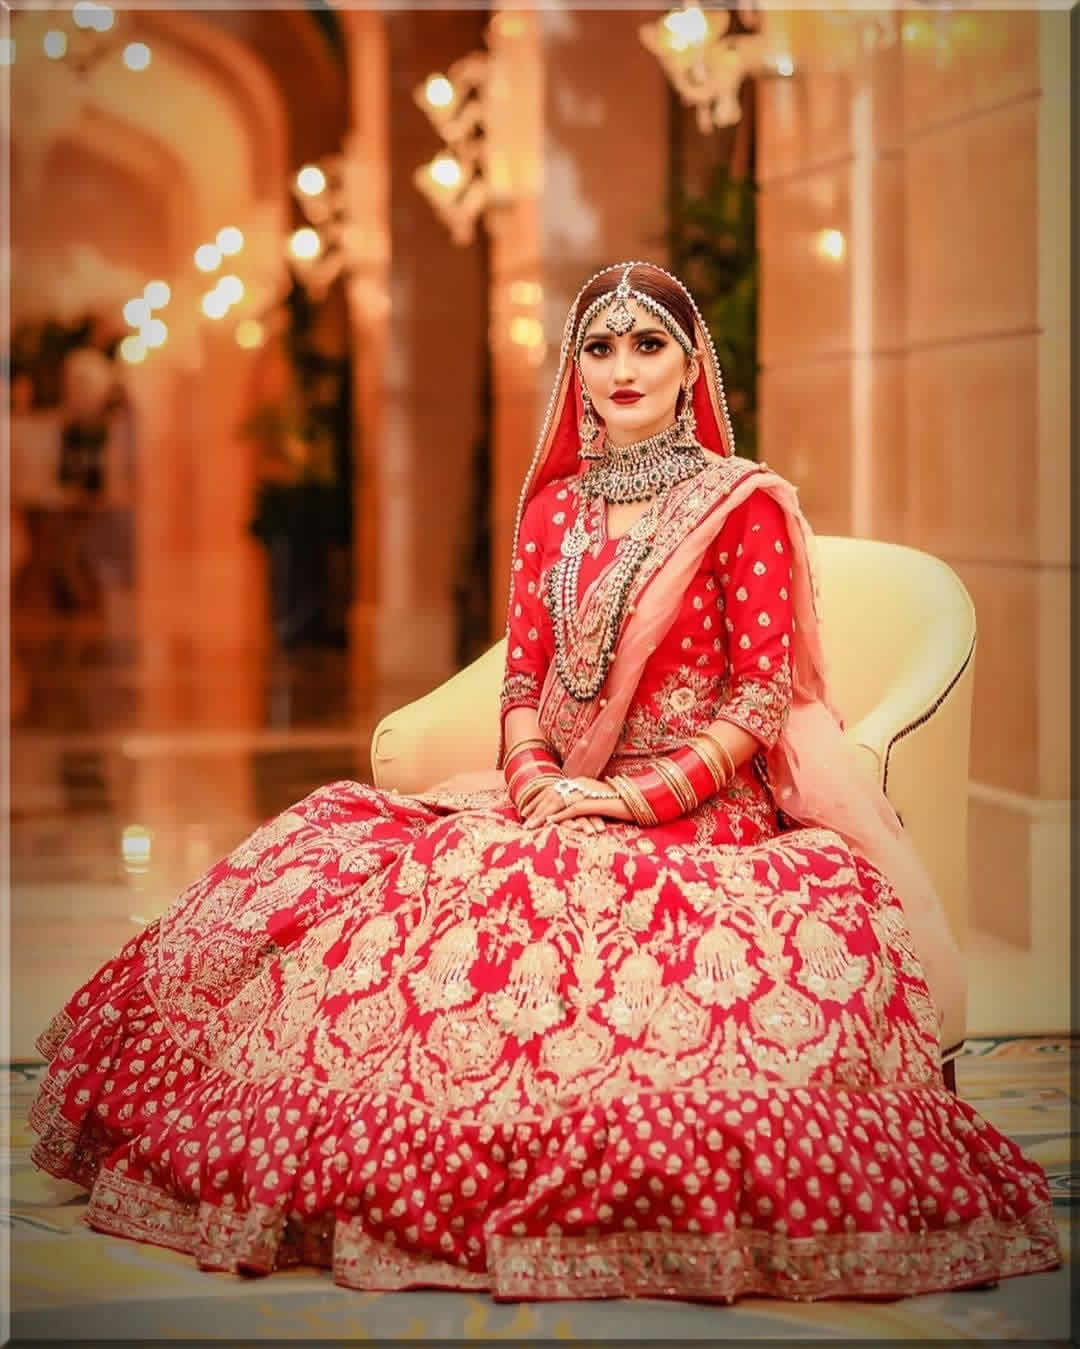 pakistani bridal dresses in red colour 2019